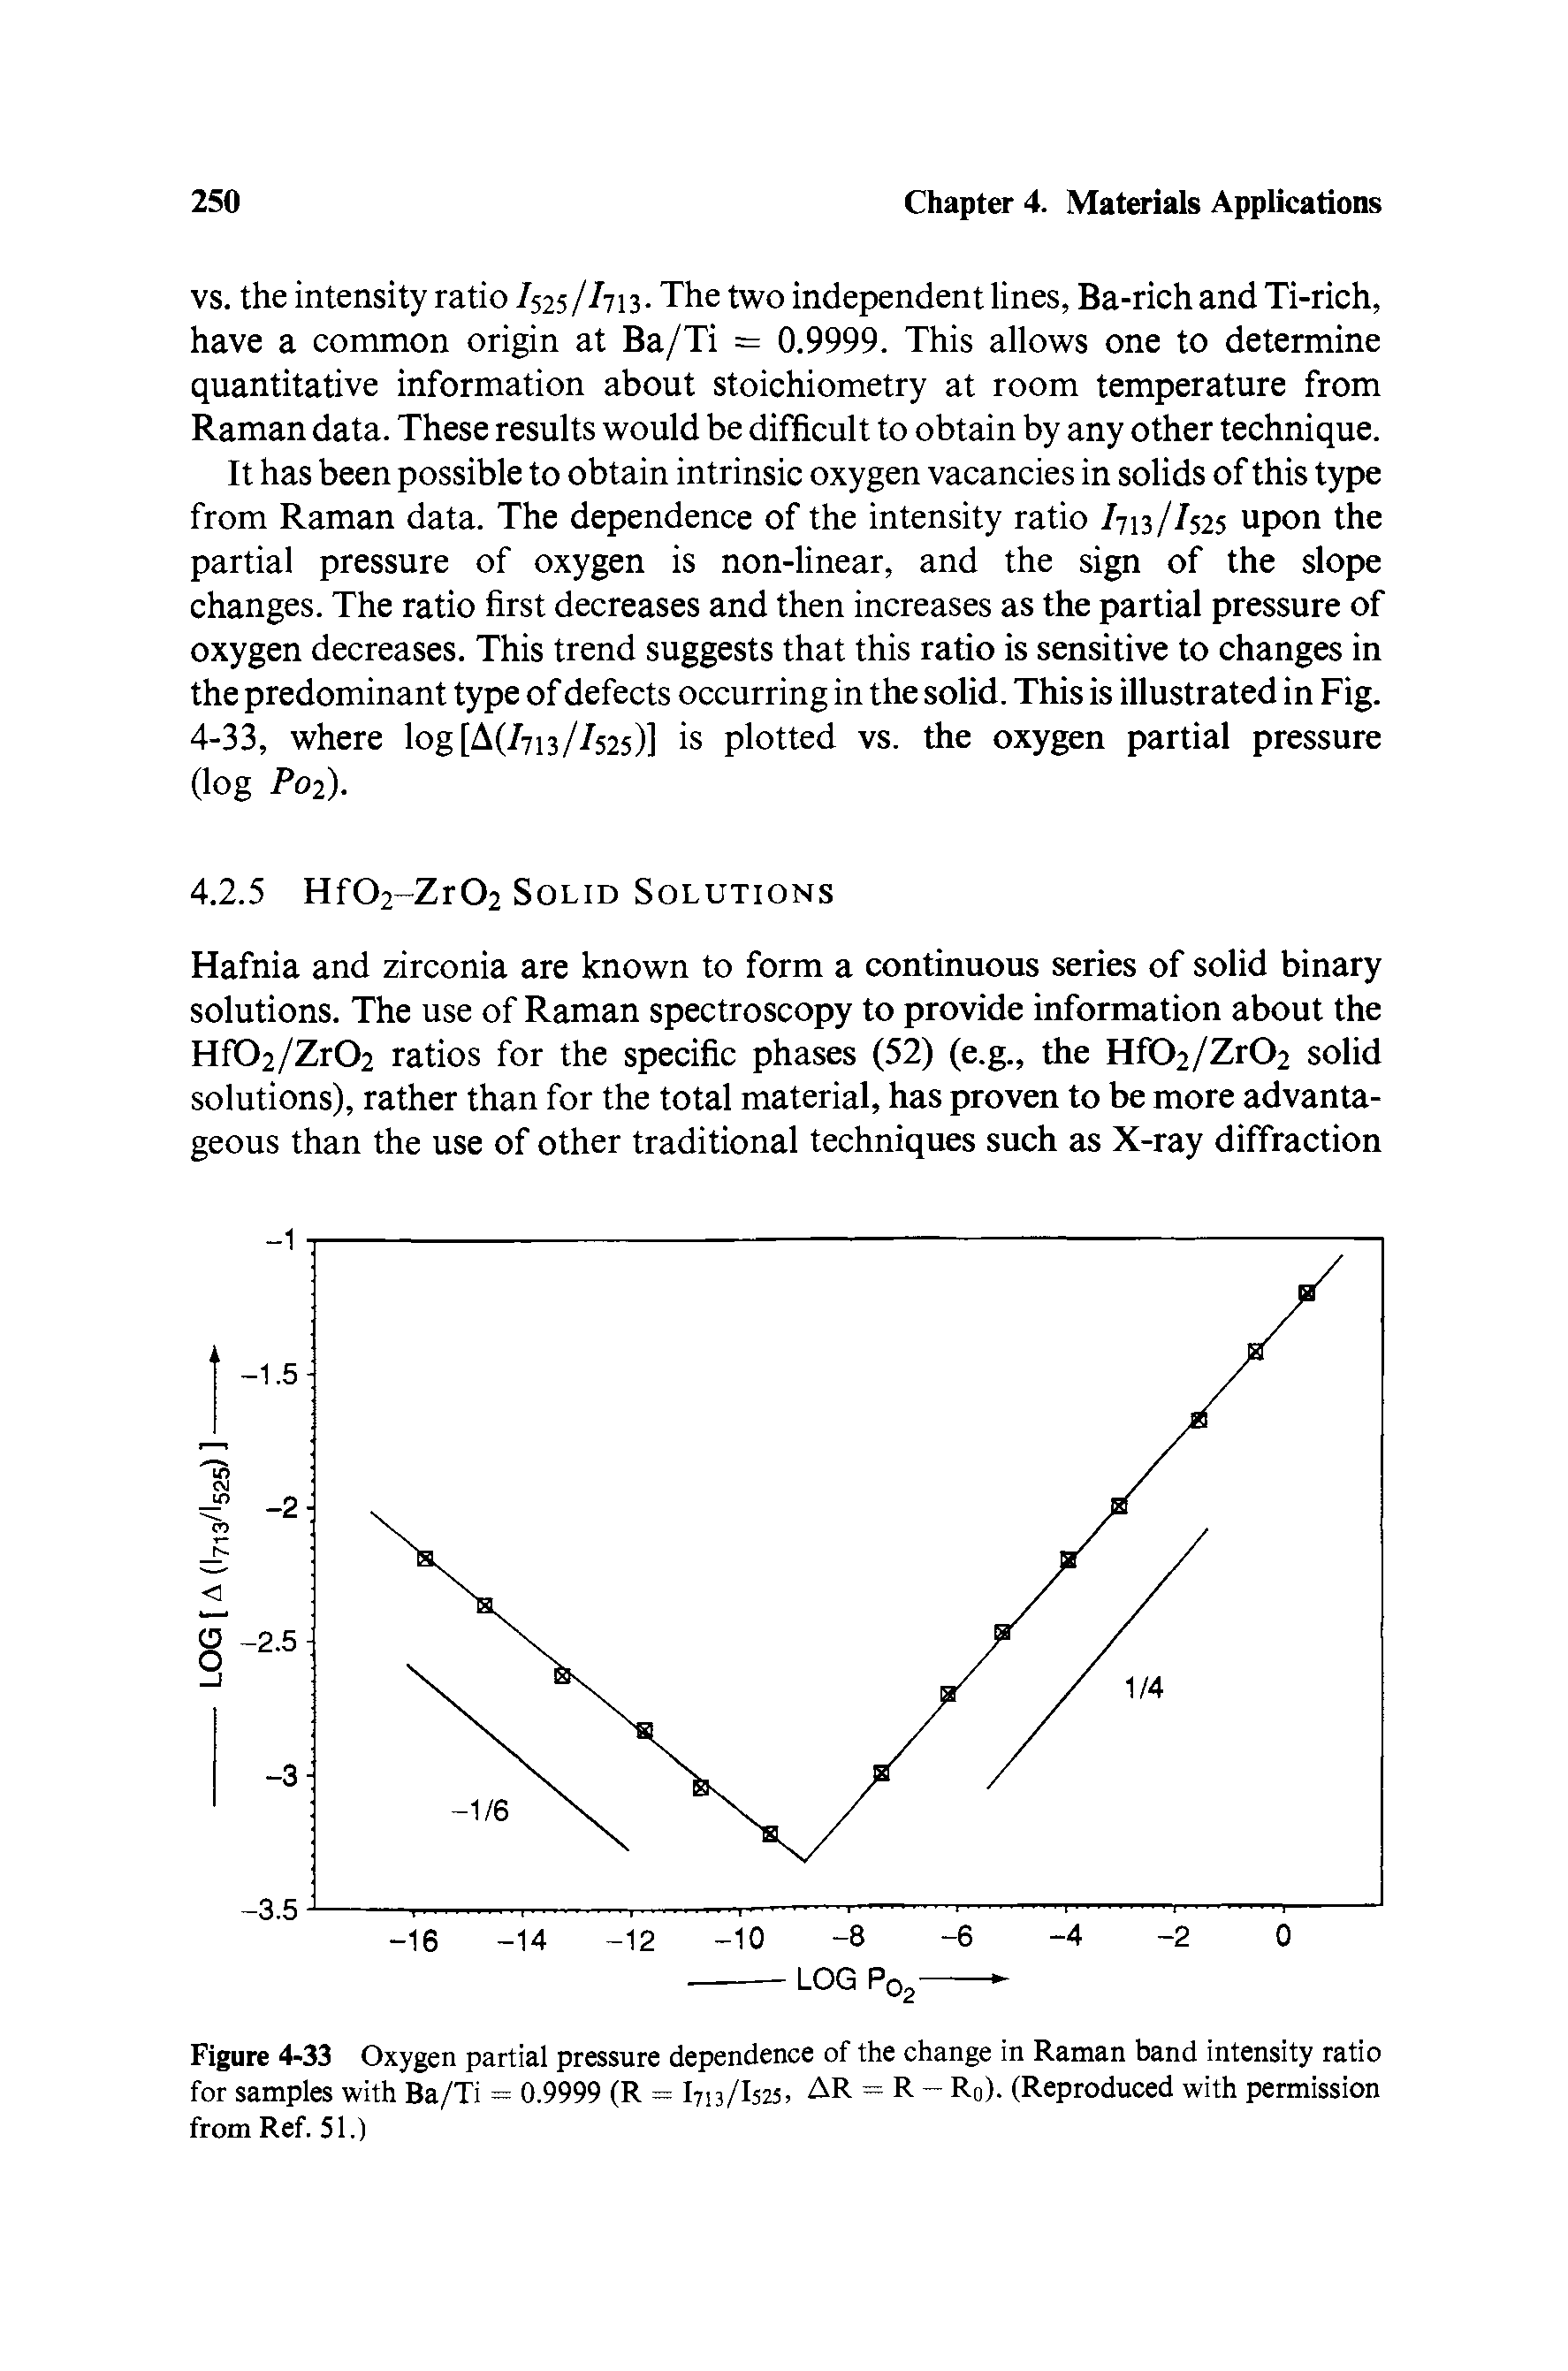 Figure 4-33 Oxygen partial pressure dependence of the change in Raman band intensity ratio for samples with Ba/Ti = 0.9999 (R = I713/I525, AR = R R0). (Reproduced with permission from Ref. 51.)...